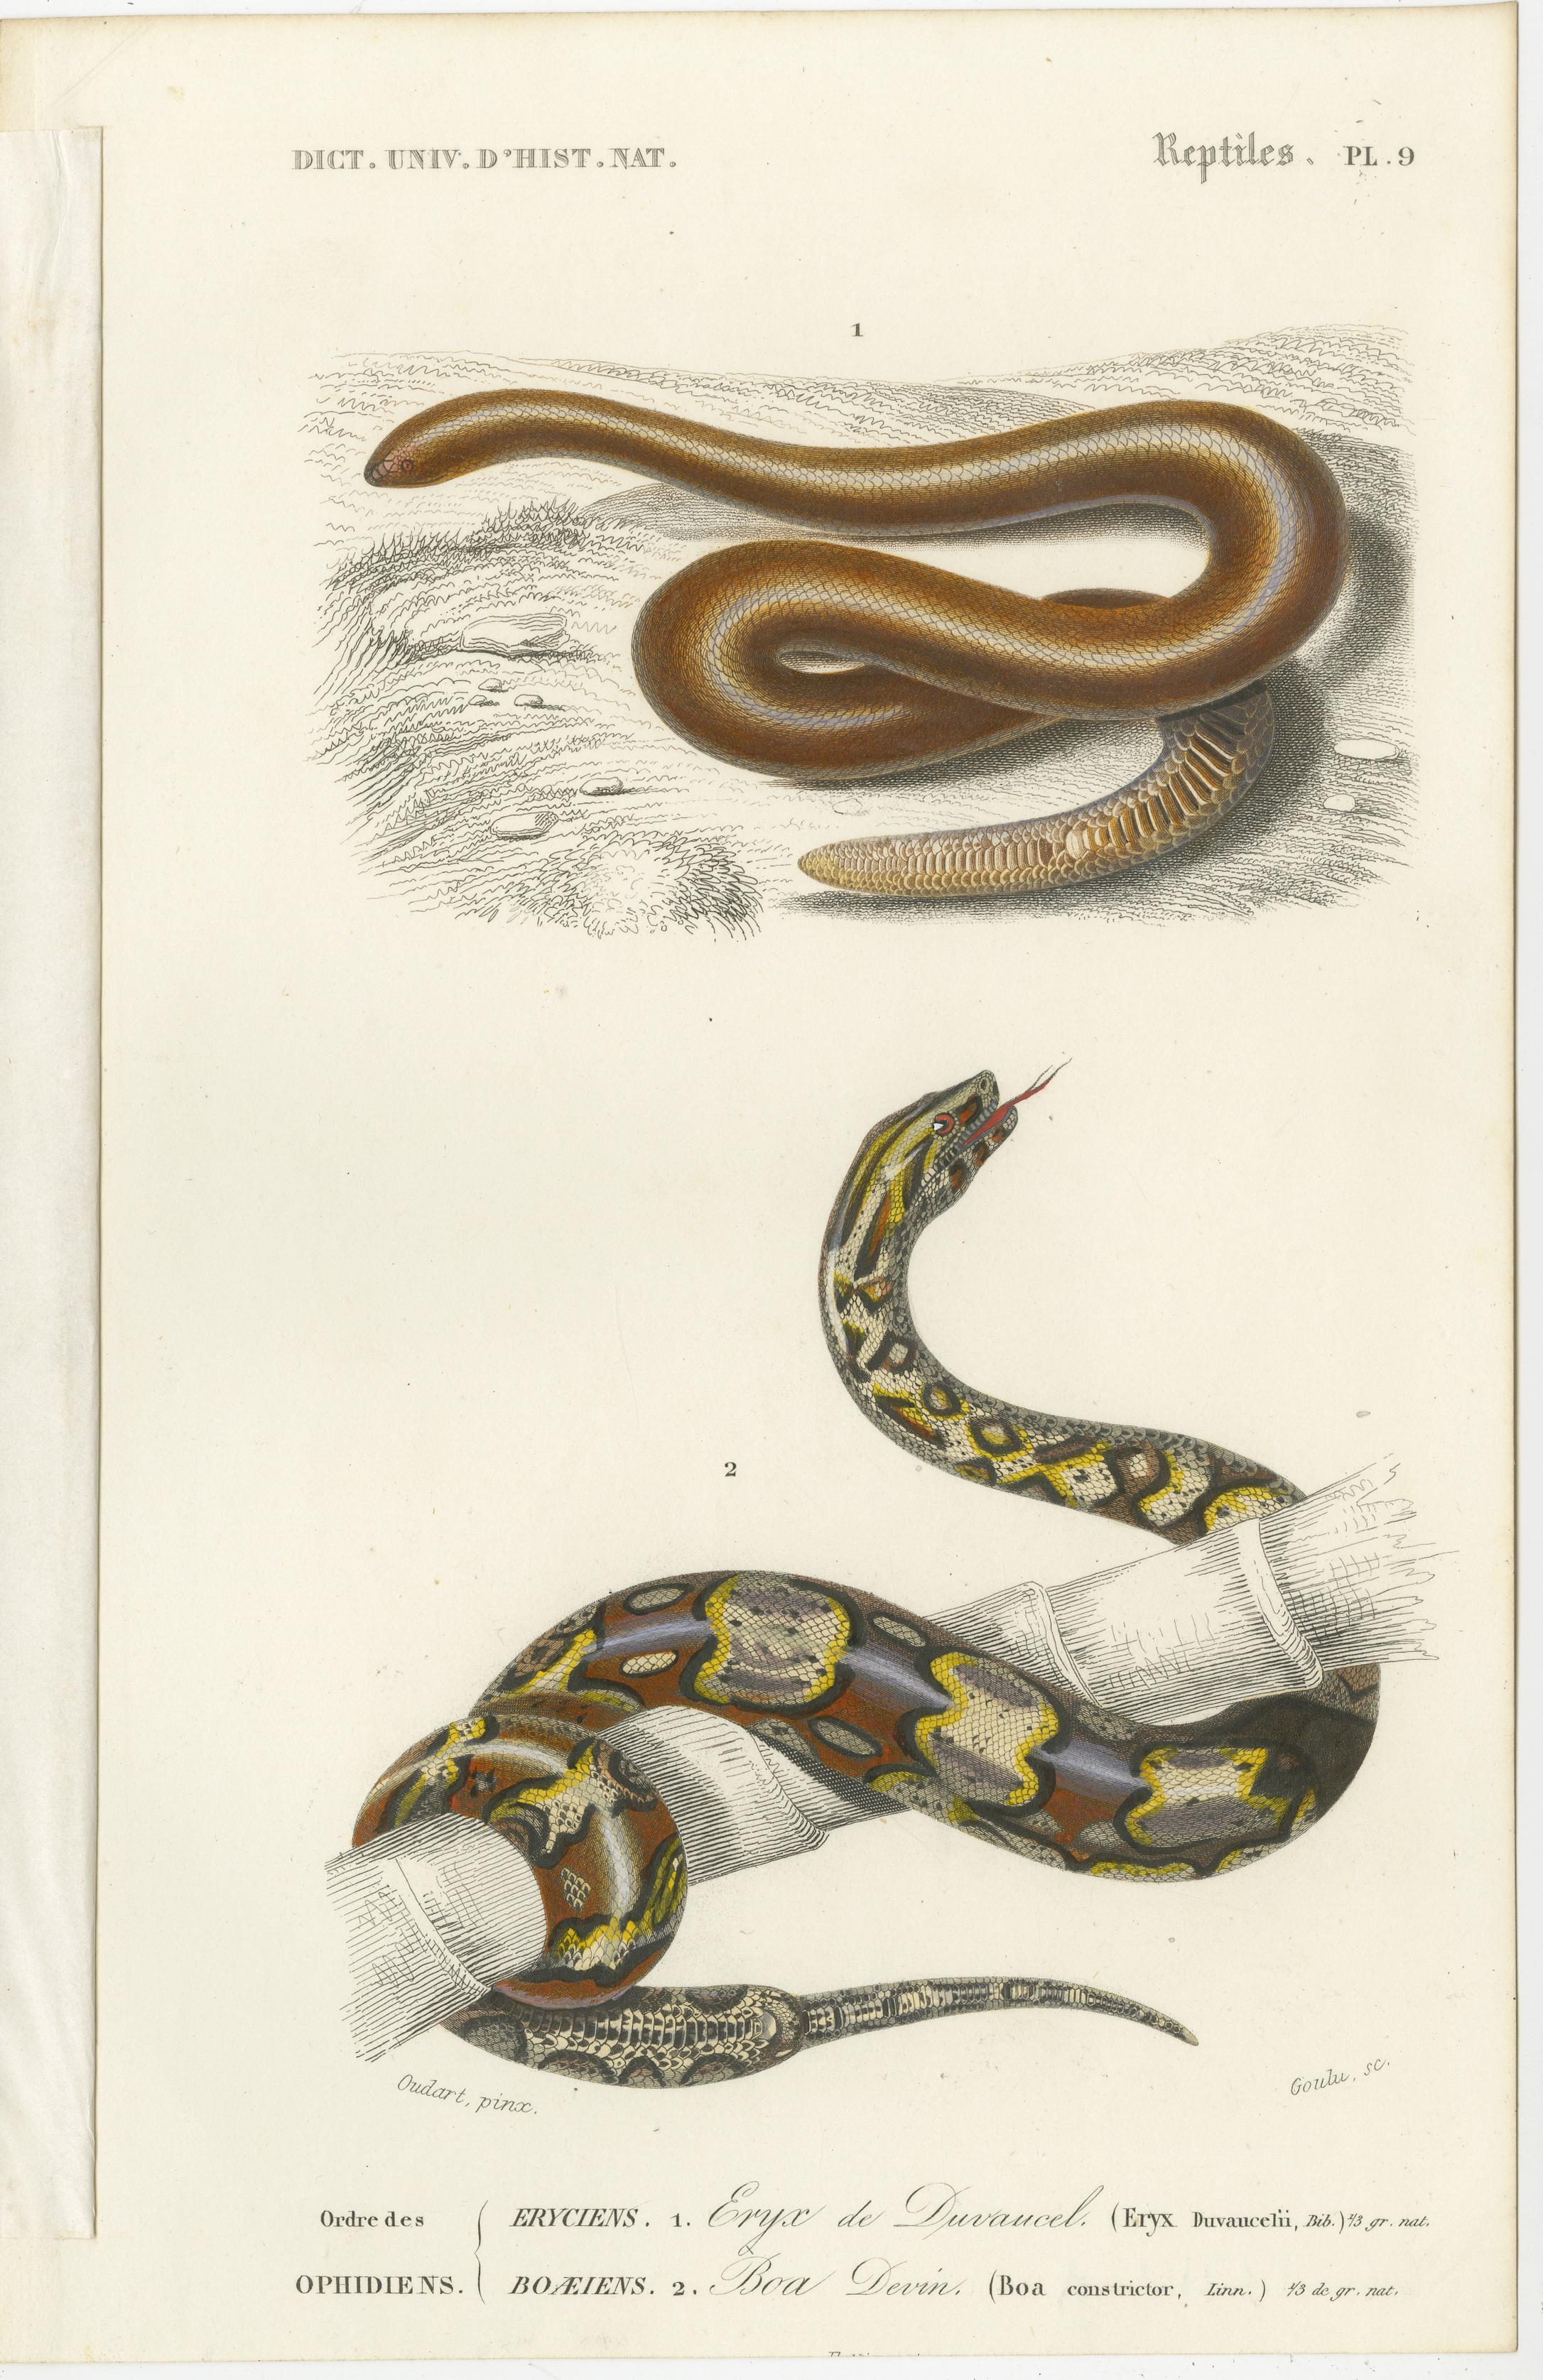 Paper Set of 7 Antique Prints of an Egyptian Cobra and other Snakes and Reptiles For Sale